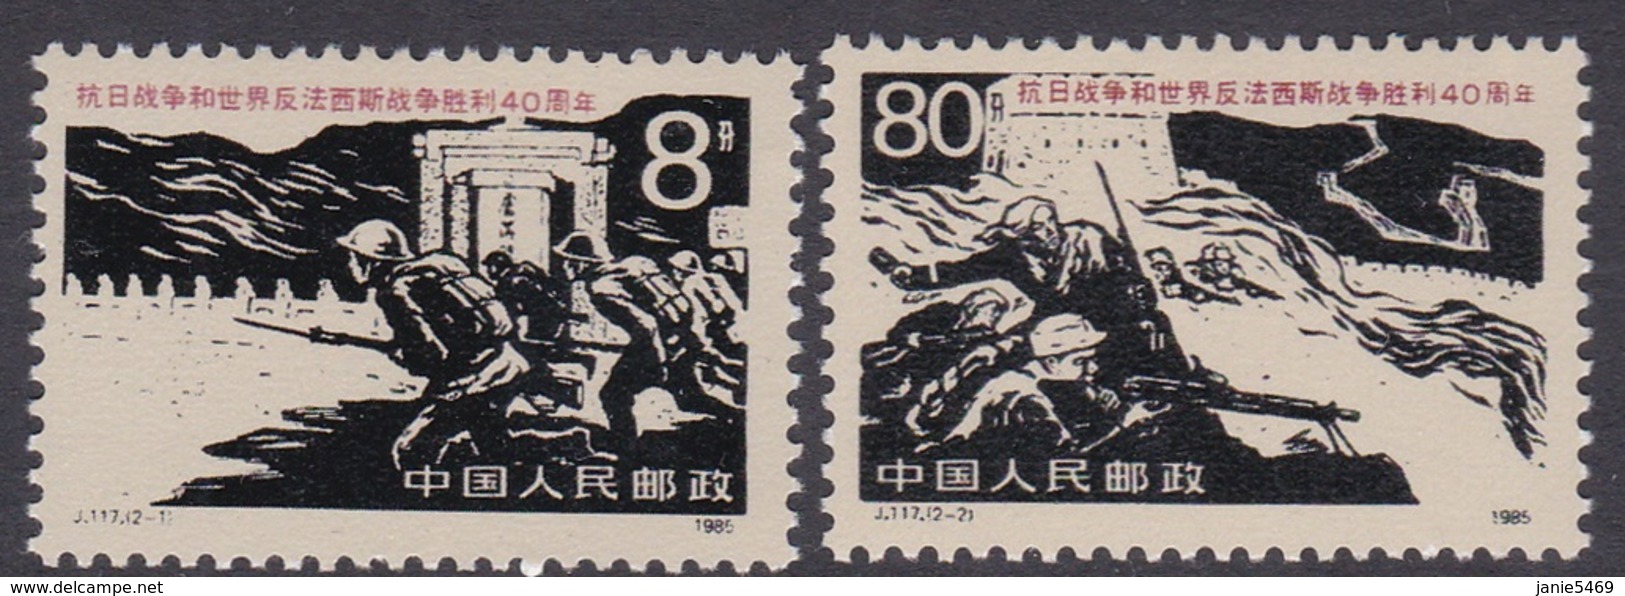 China People's Republic SG 3406-3407 1985 40th Anniversary Victory Over Japan, Mint Never Hinged - Ongebruikt